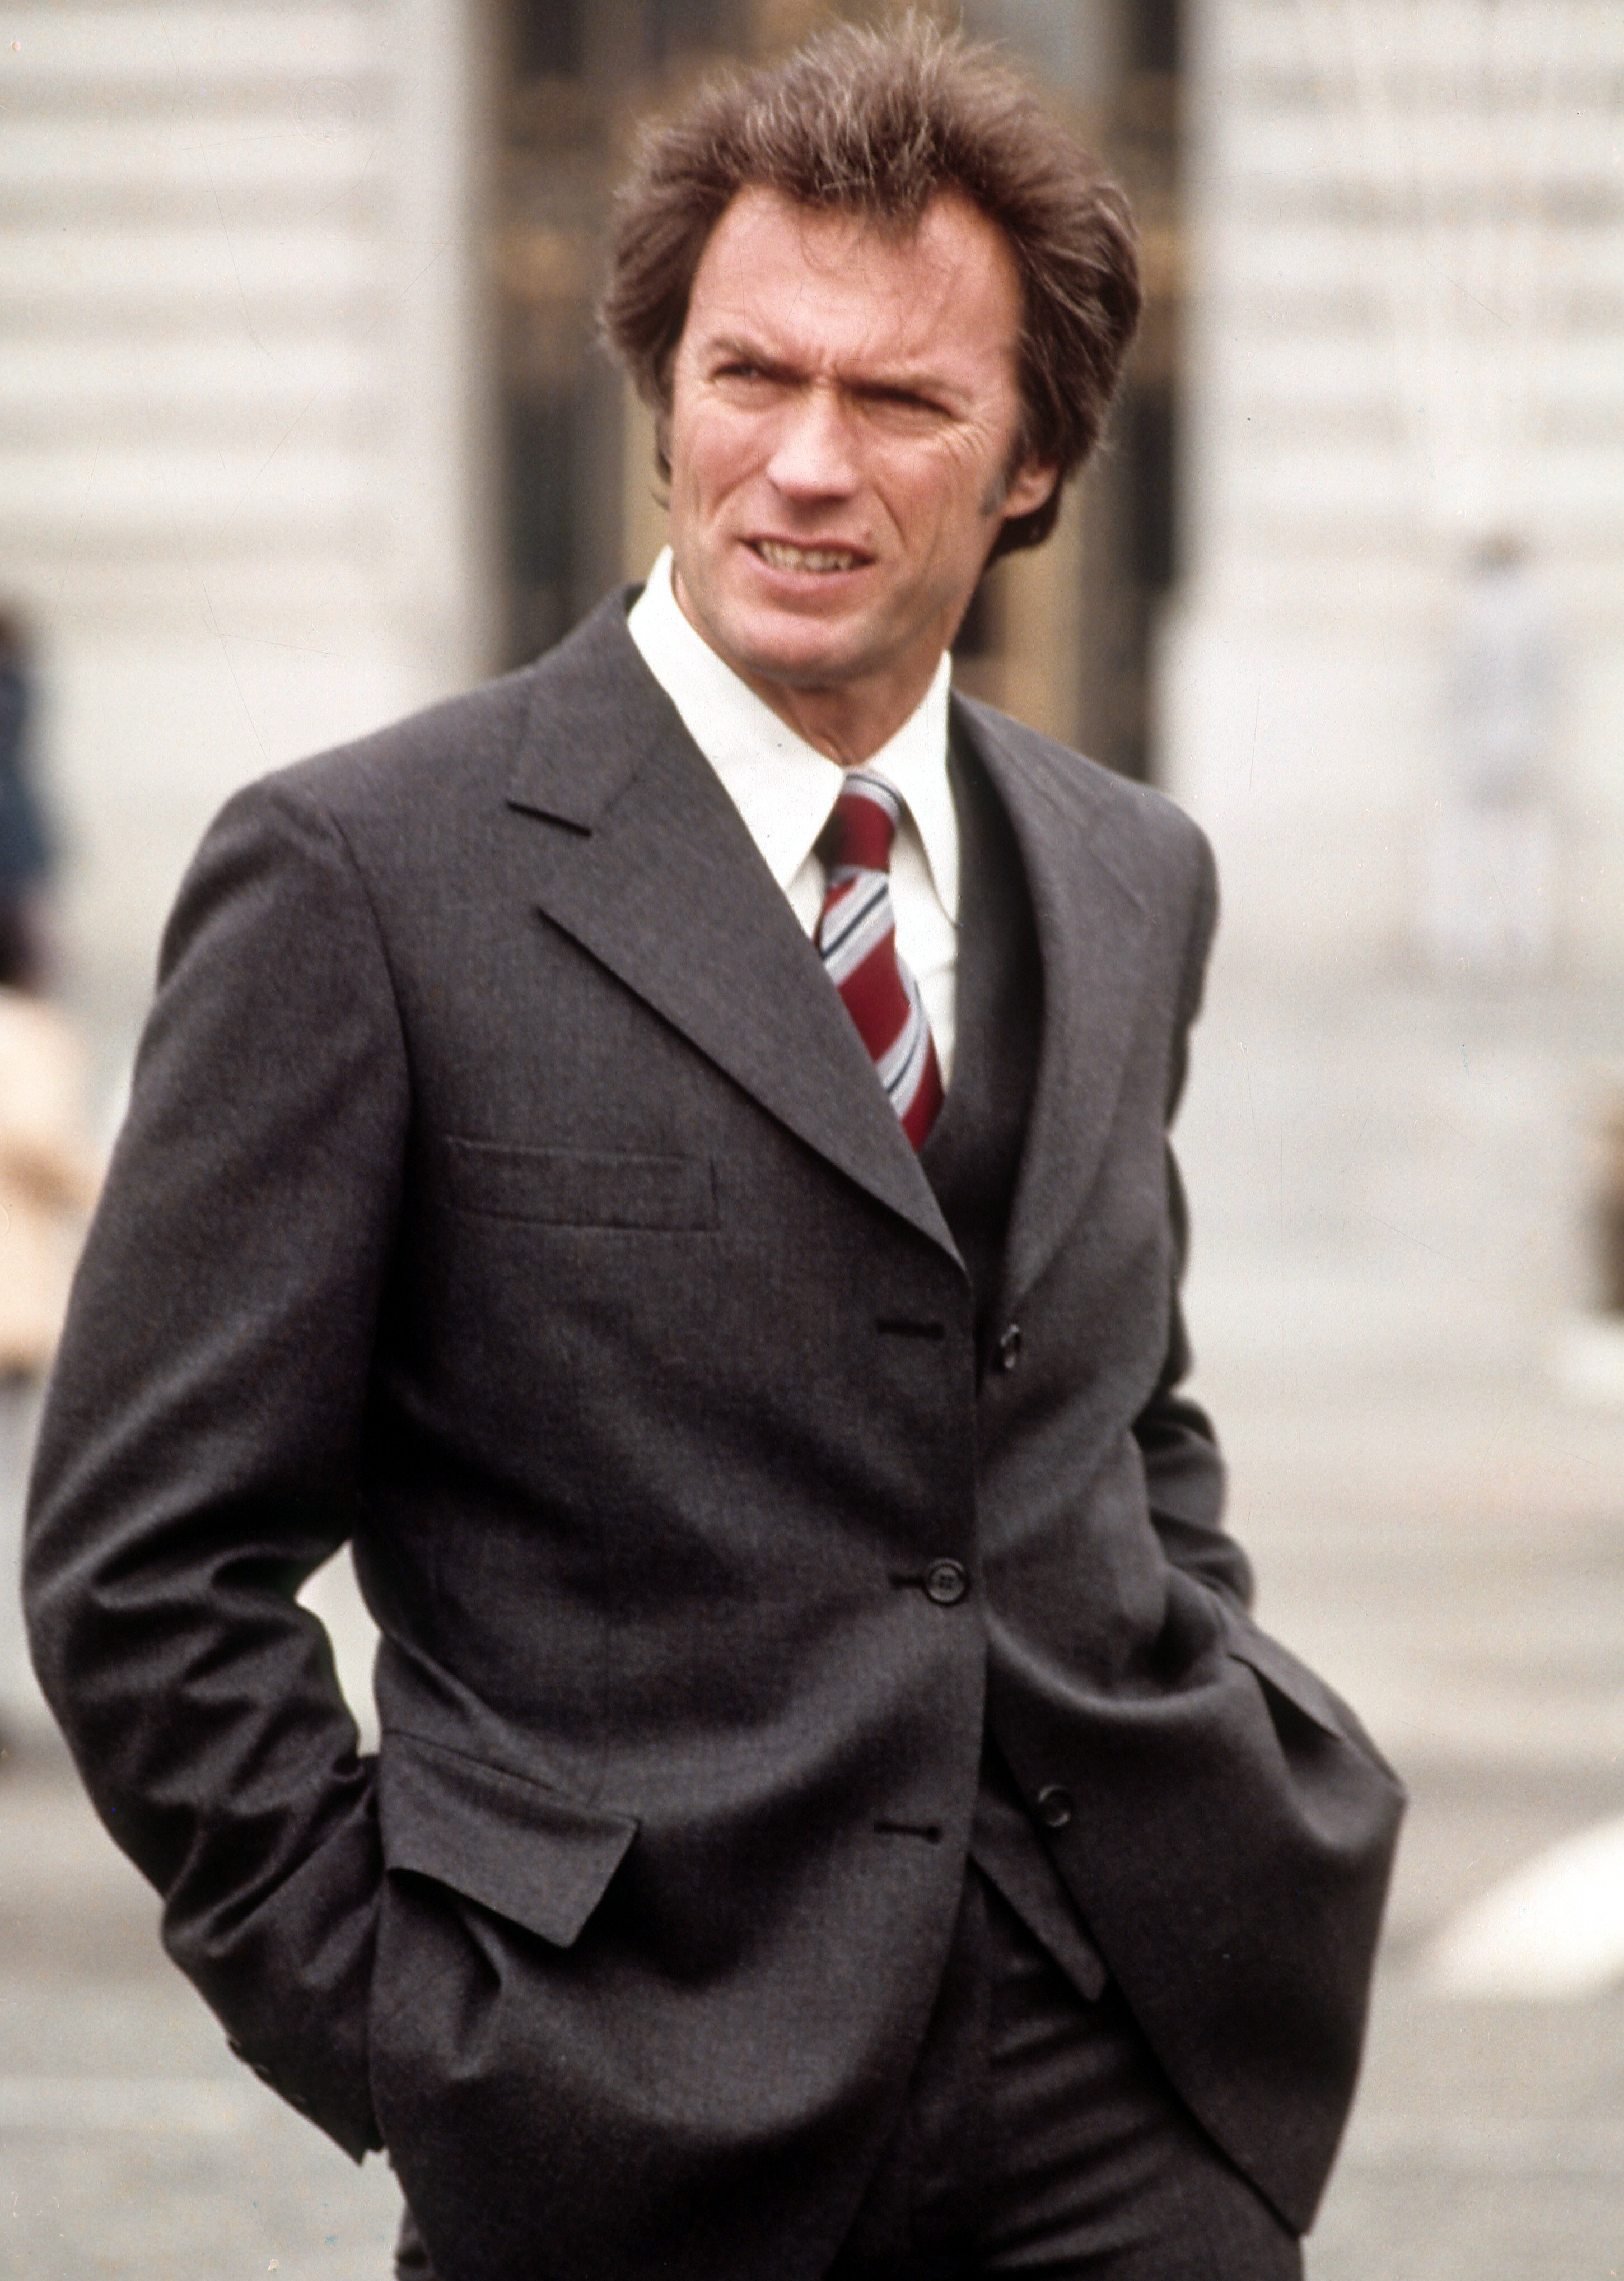 Clint Eastwood in a scene from "Dirty Harry" in 1971. | Source: Getty Images